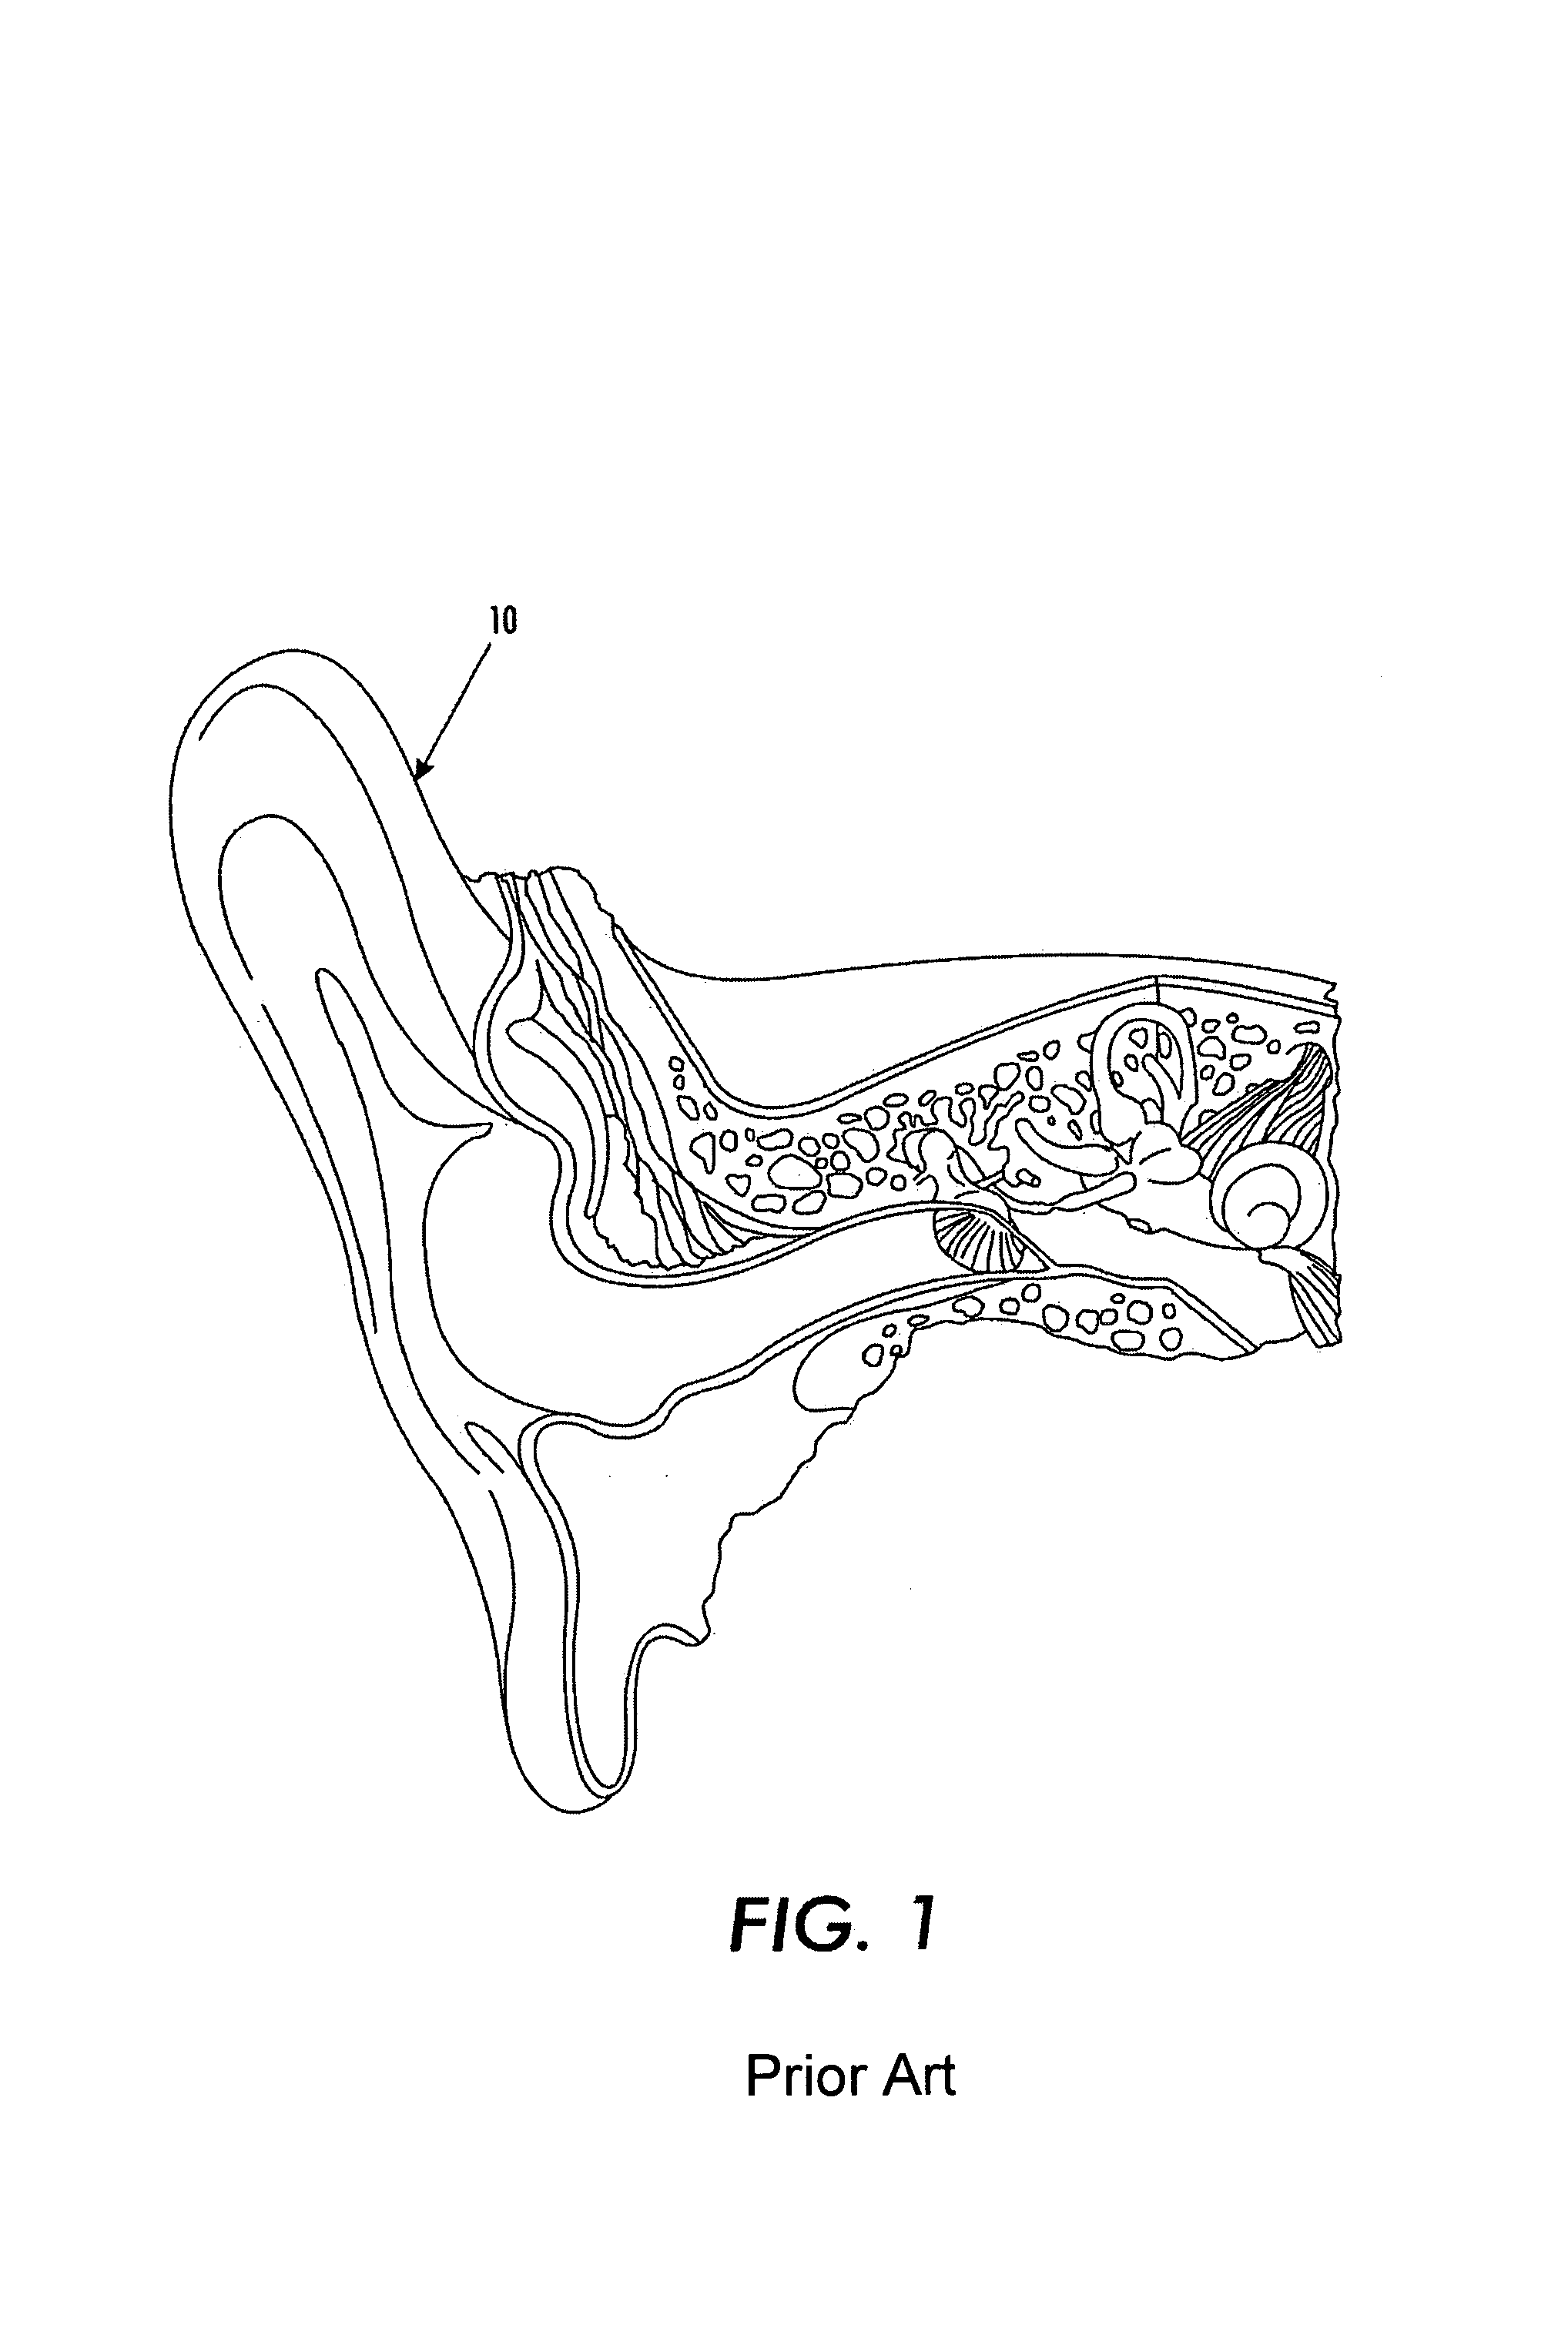 In the ear hearing aid utilizing annular ring acoustic seals